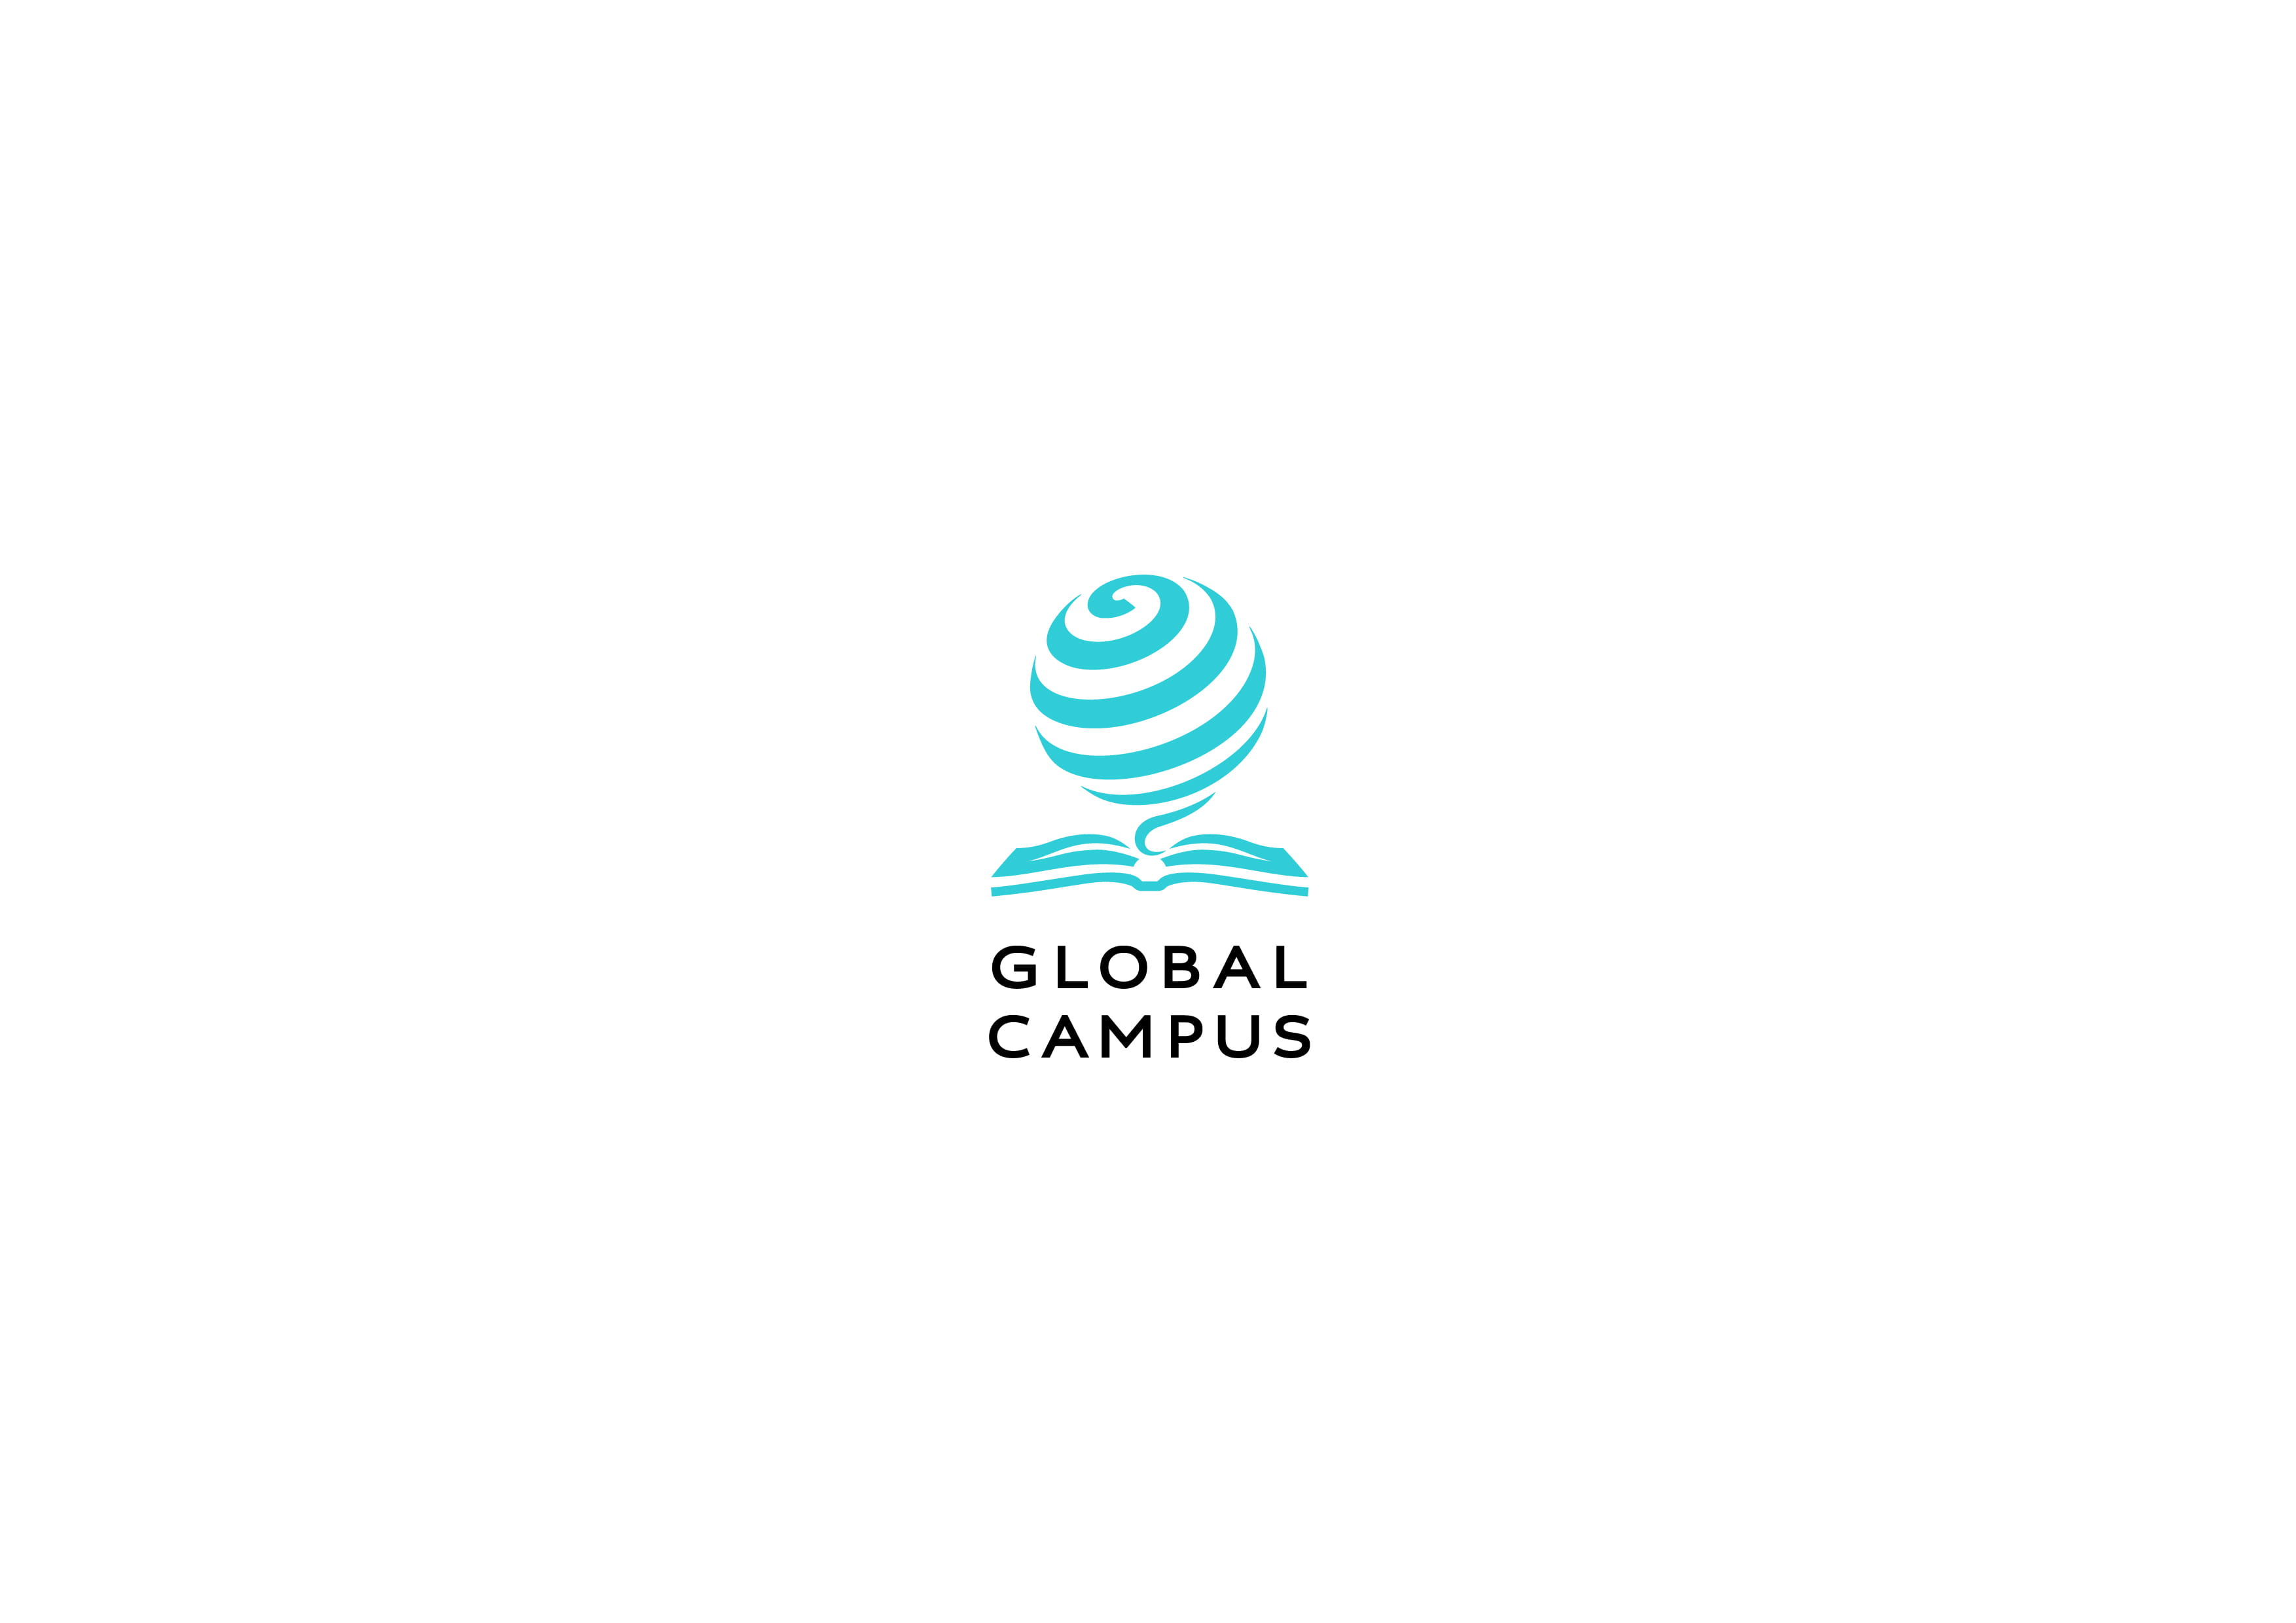 Global Campus provides exciting new events and opportunities for Northbridge students - global-campus-provides-exciting-new-events-and-opportunities-for-northbridge-students